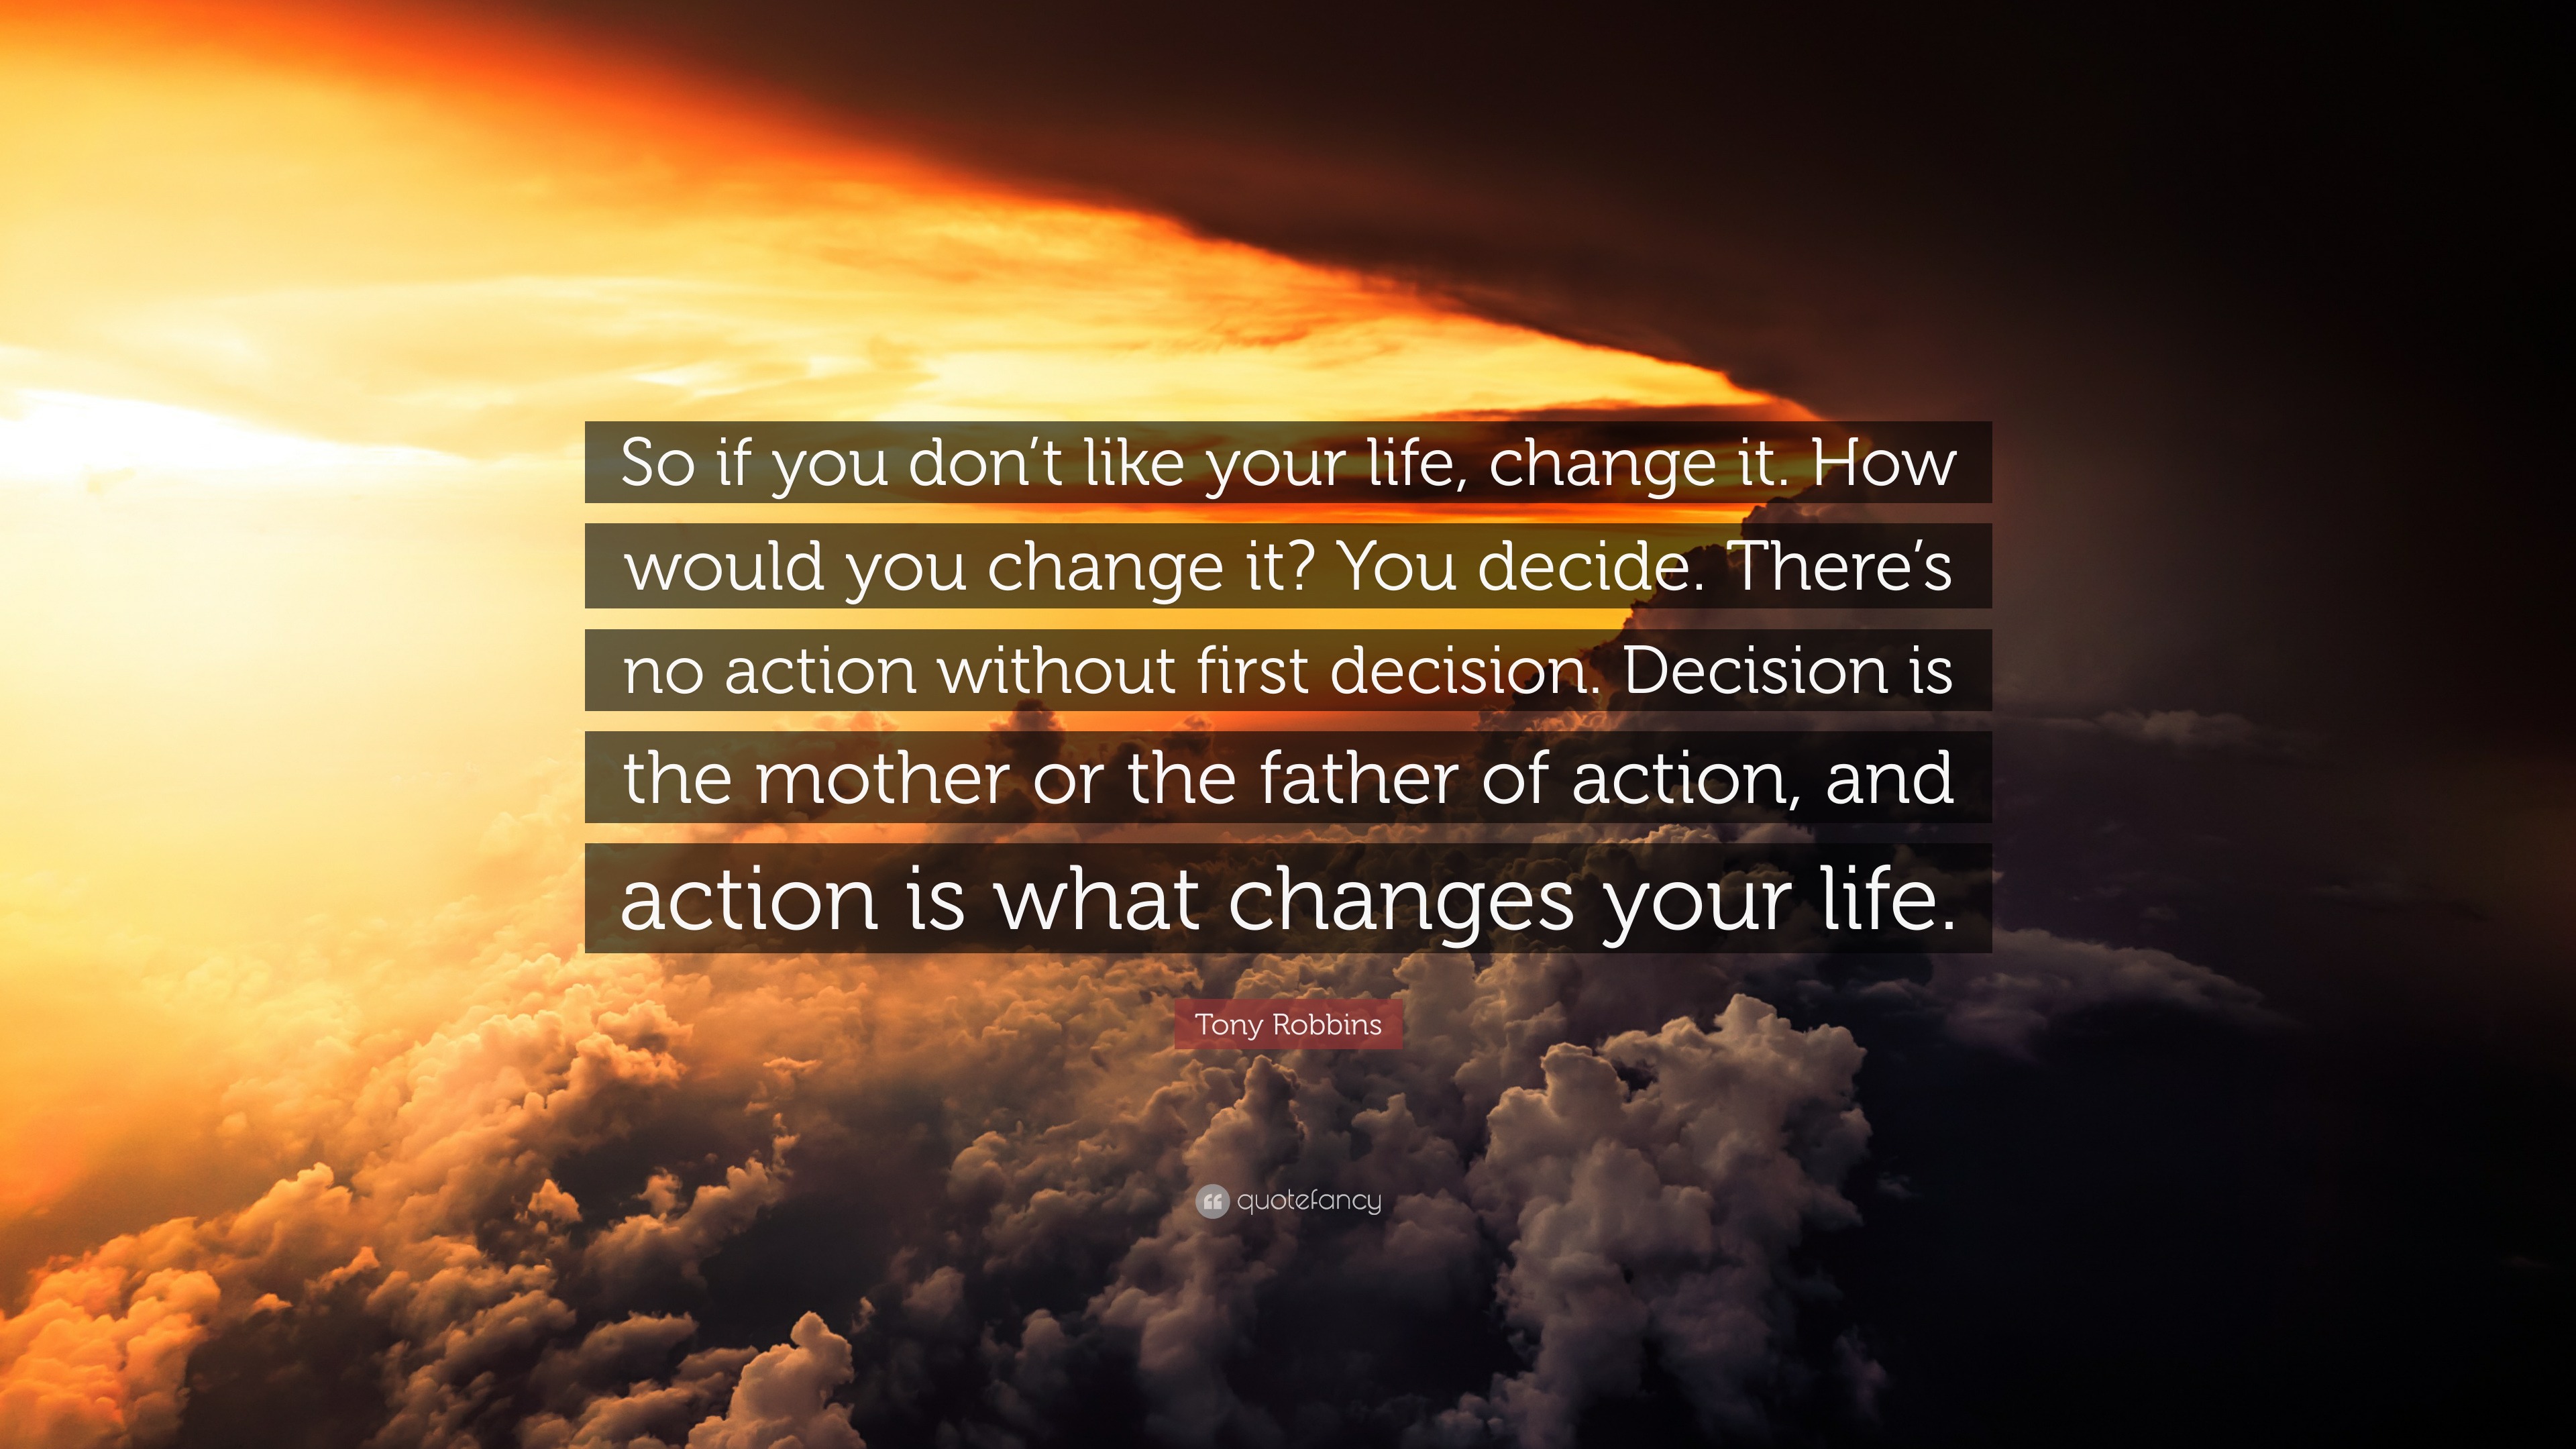 Tony Robbins Quote “So if you don t like your life change